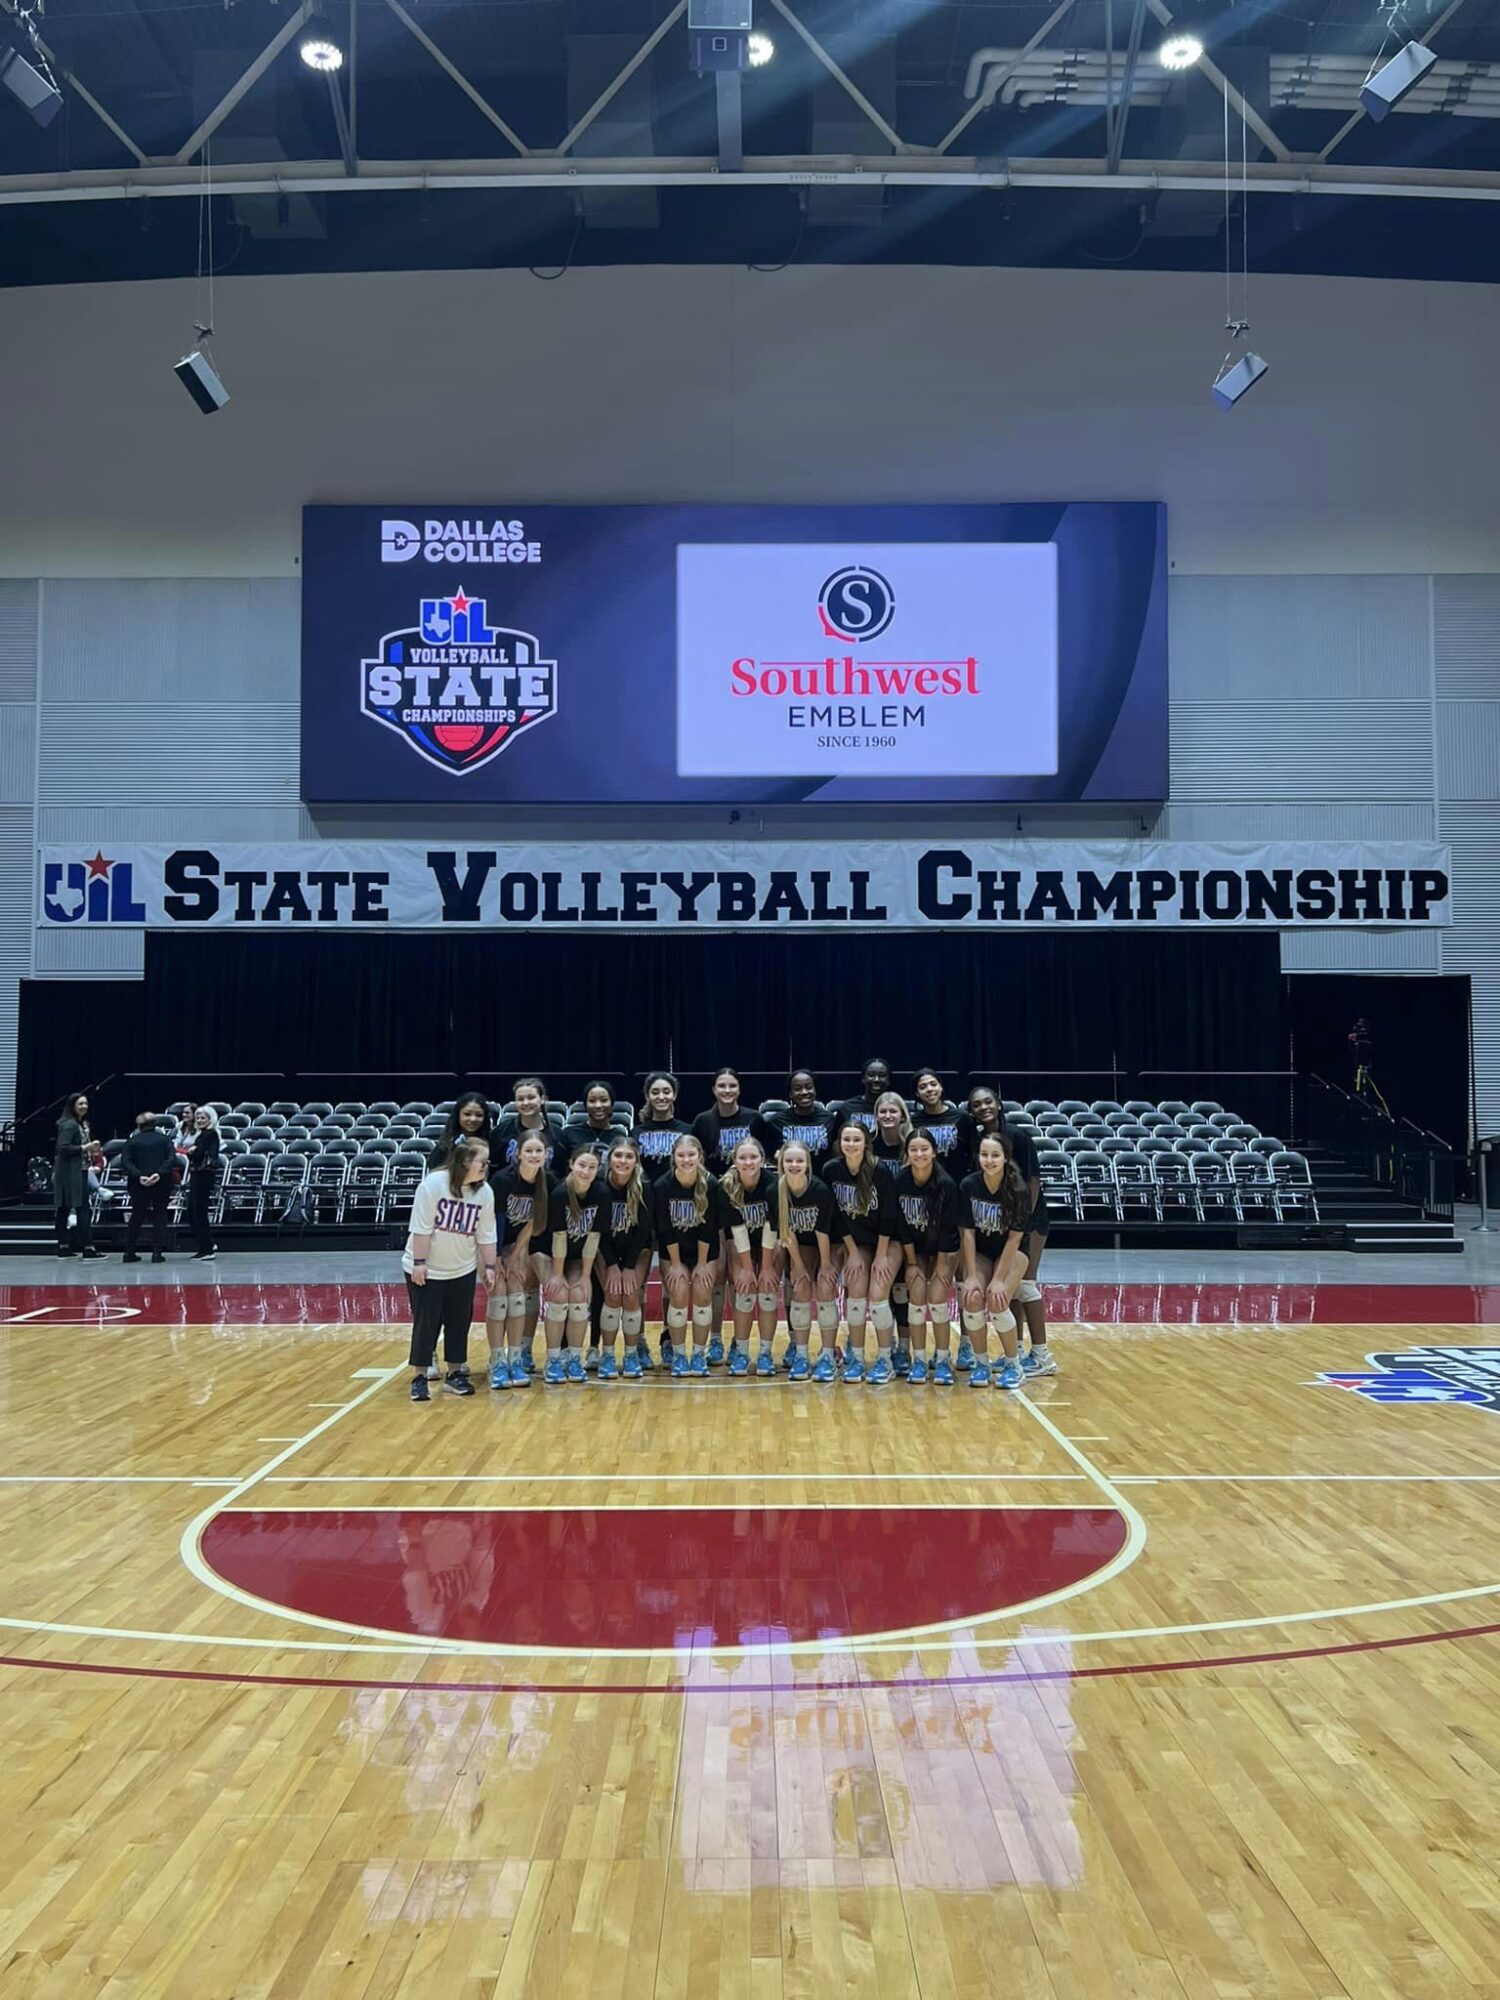 The Grand Oaks High School Volleyball Team poses in a gym with the State Volleyball Championship banner in the background.